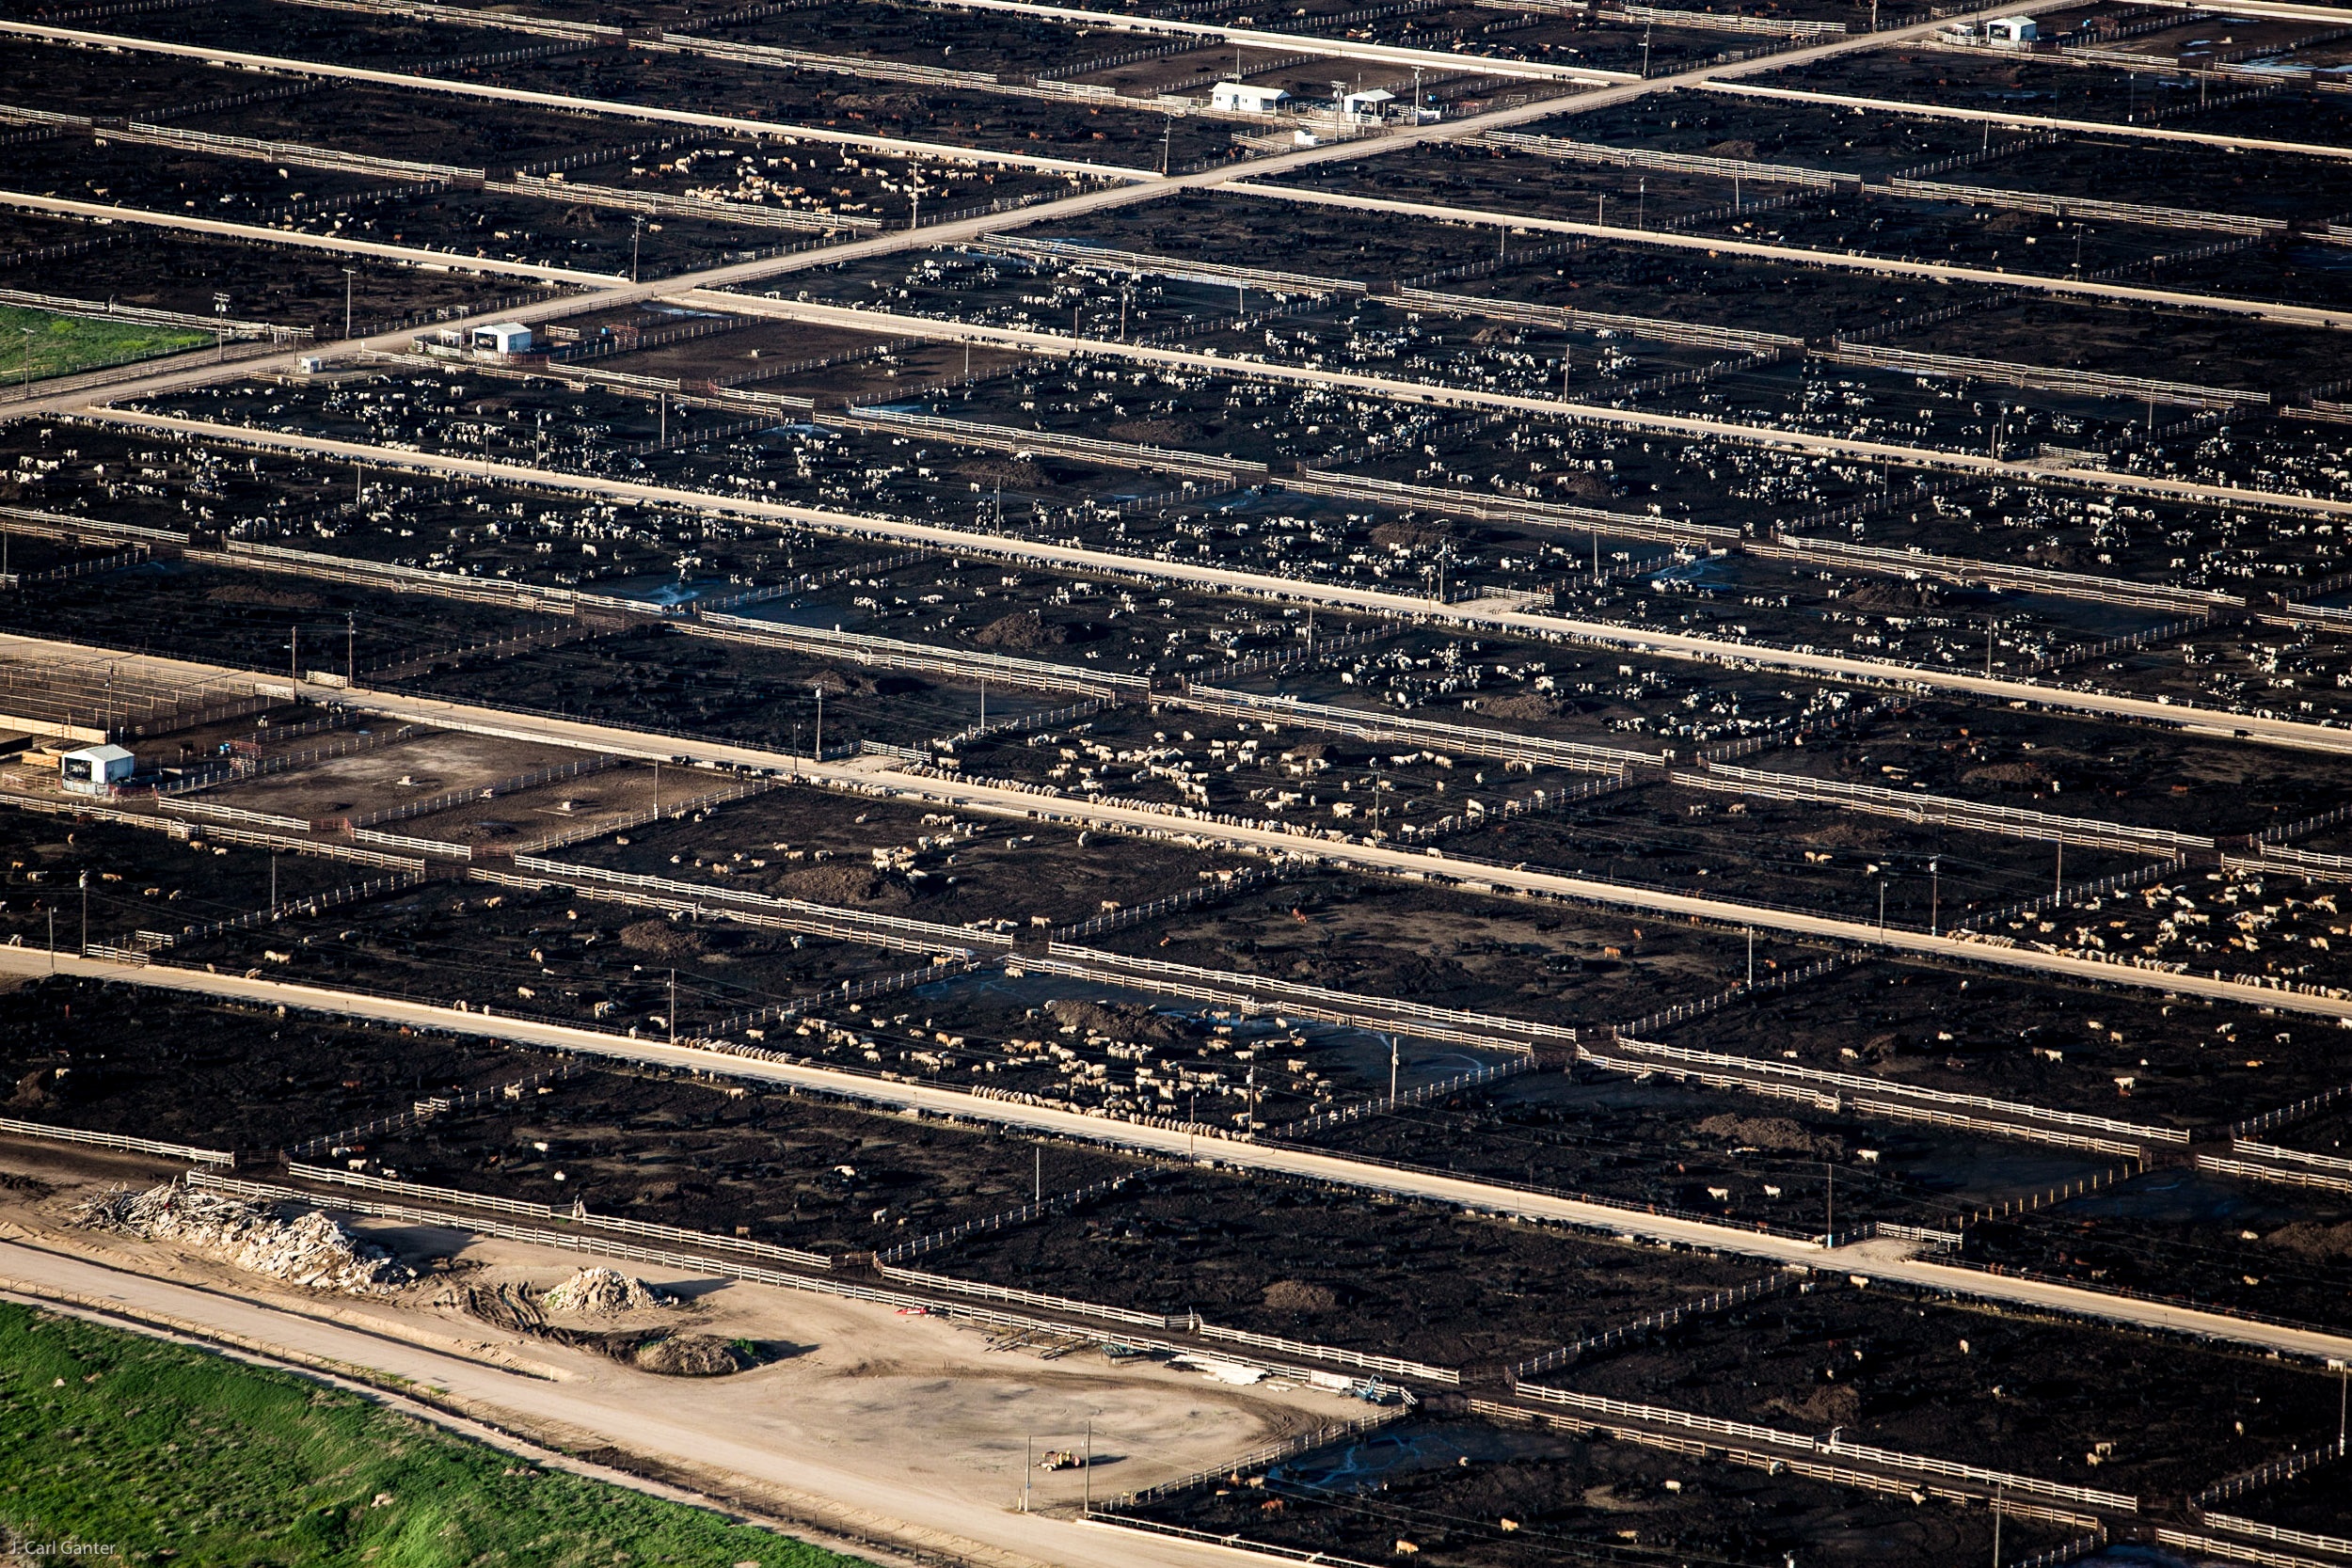 A cattle feedlot in Weld County, Colorado. Photo © J. Carl Ganter / Circle of Blue